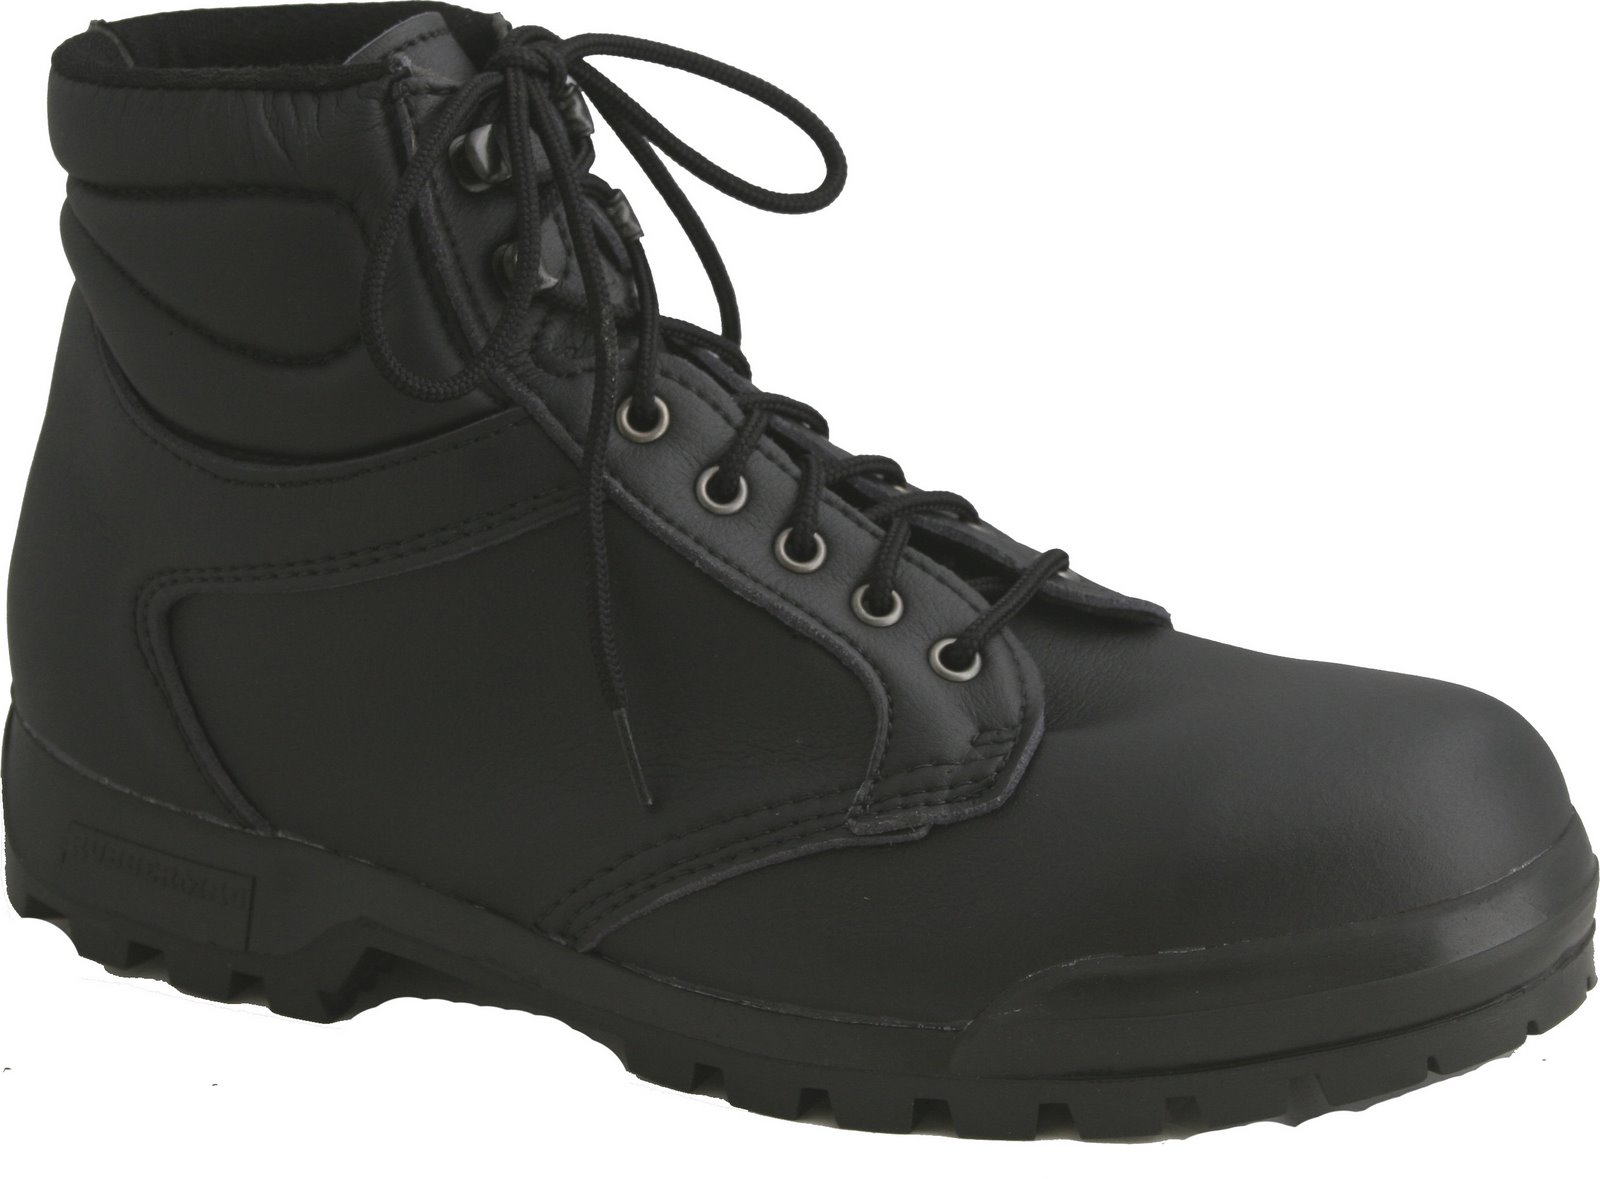 Vegan Steel Toe Capped Safety Boots